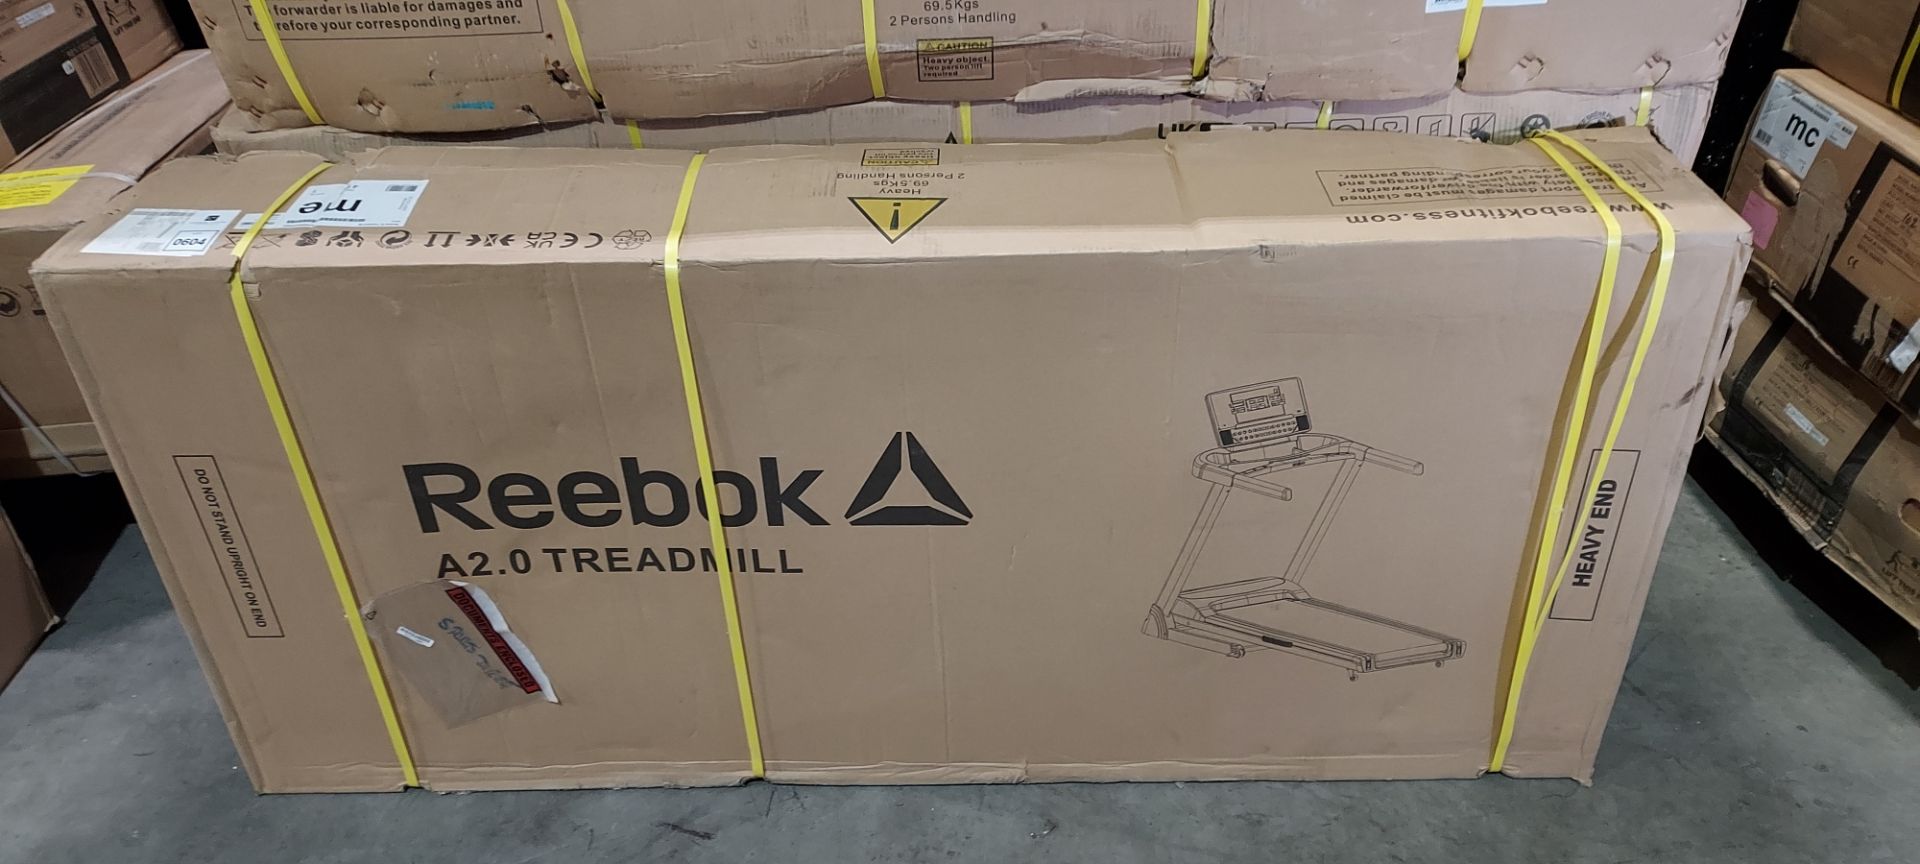 1 X BRAND NEW FACTORY SEALED REEBOK A2 TREADMILL 00 IN SILVER GROSS WEIGHT 69.5KG (NOTE BOX SLIGHTLY - Image 2 of 2